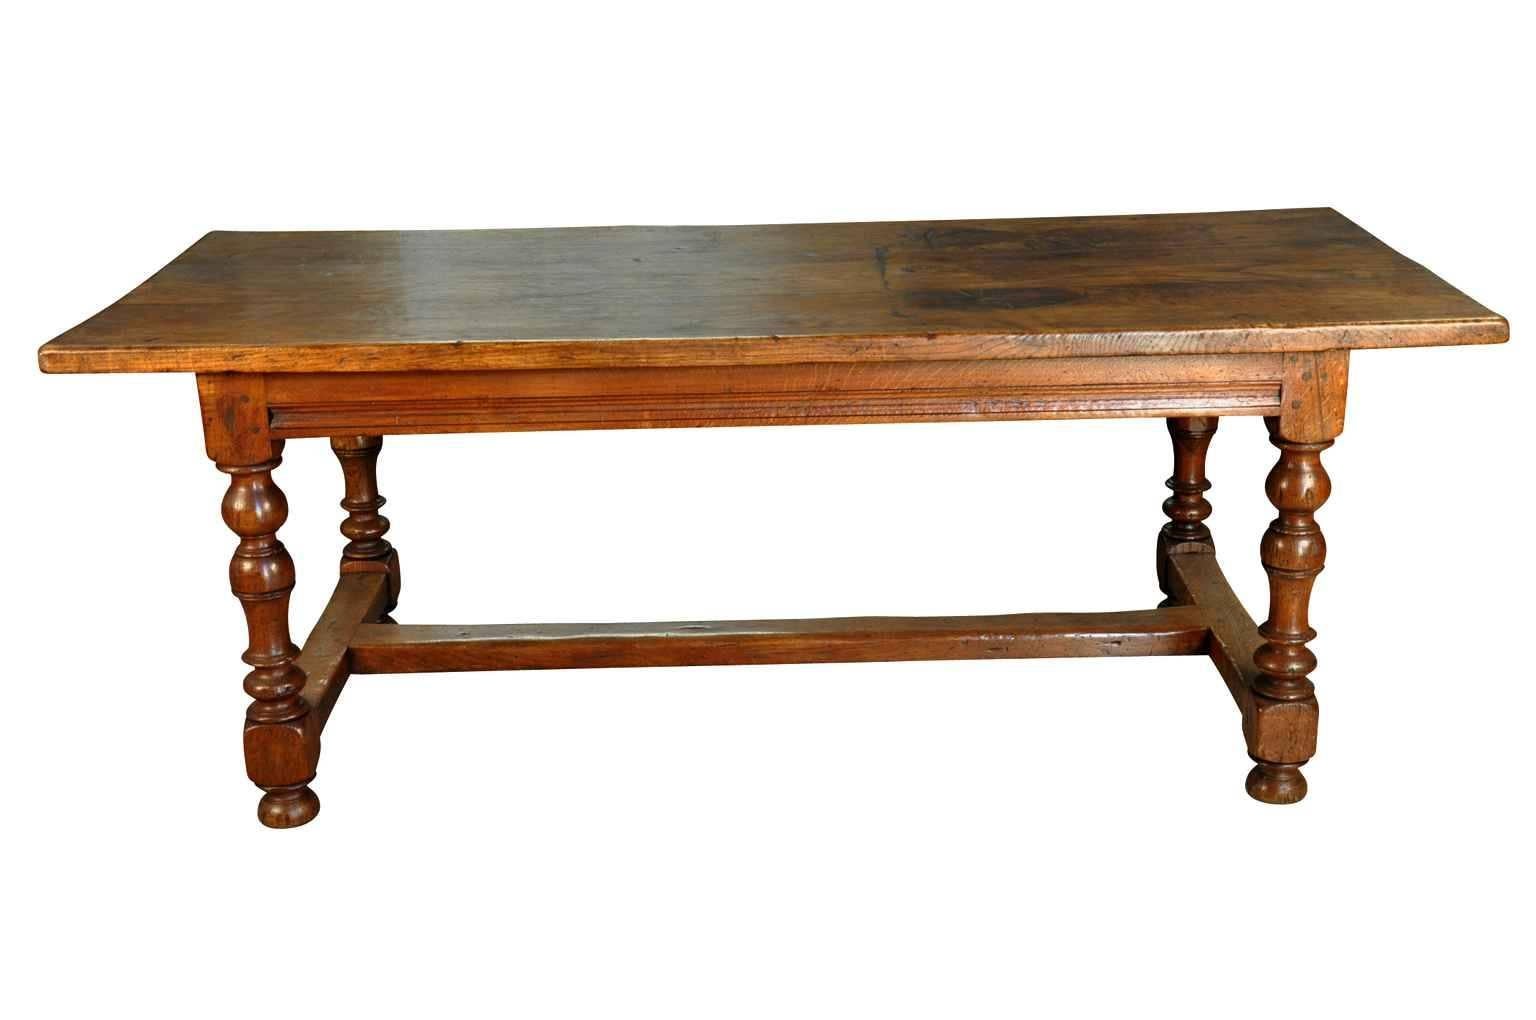 A very handsome 19th century Farm Table in chestnut from France.  Beautifully constructed with shapely turned legs and a trestle base.  The patina and grain on this piece are rich and luminous.  Wonderful not only as a writing table, but serves